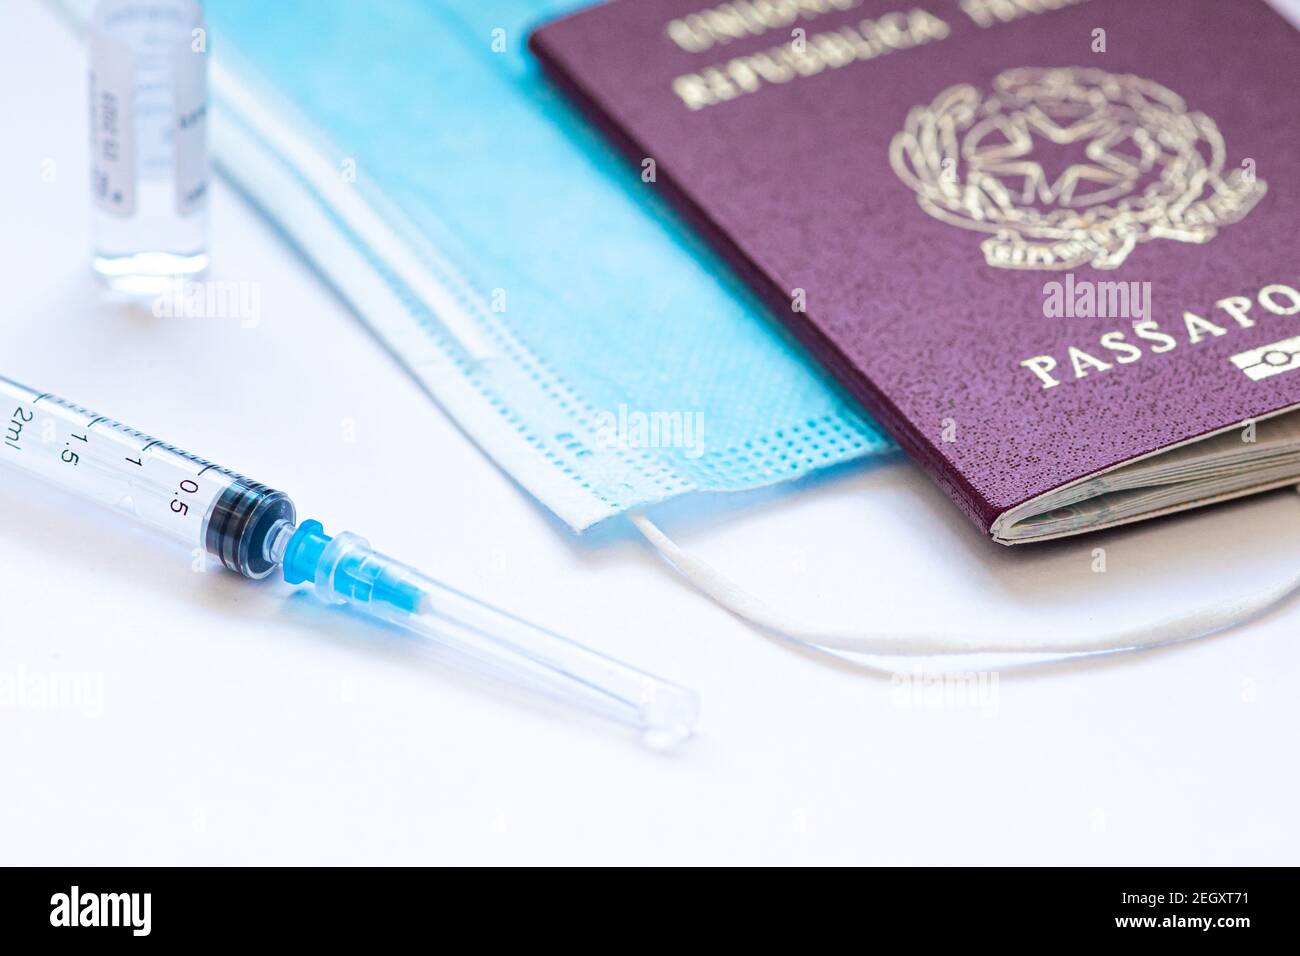 Syringe with needle, vial, surgical face mask and passport or visa on a white table ready to be used. Covid or Coronavirus vaccine background Stock Photo